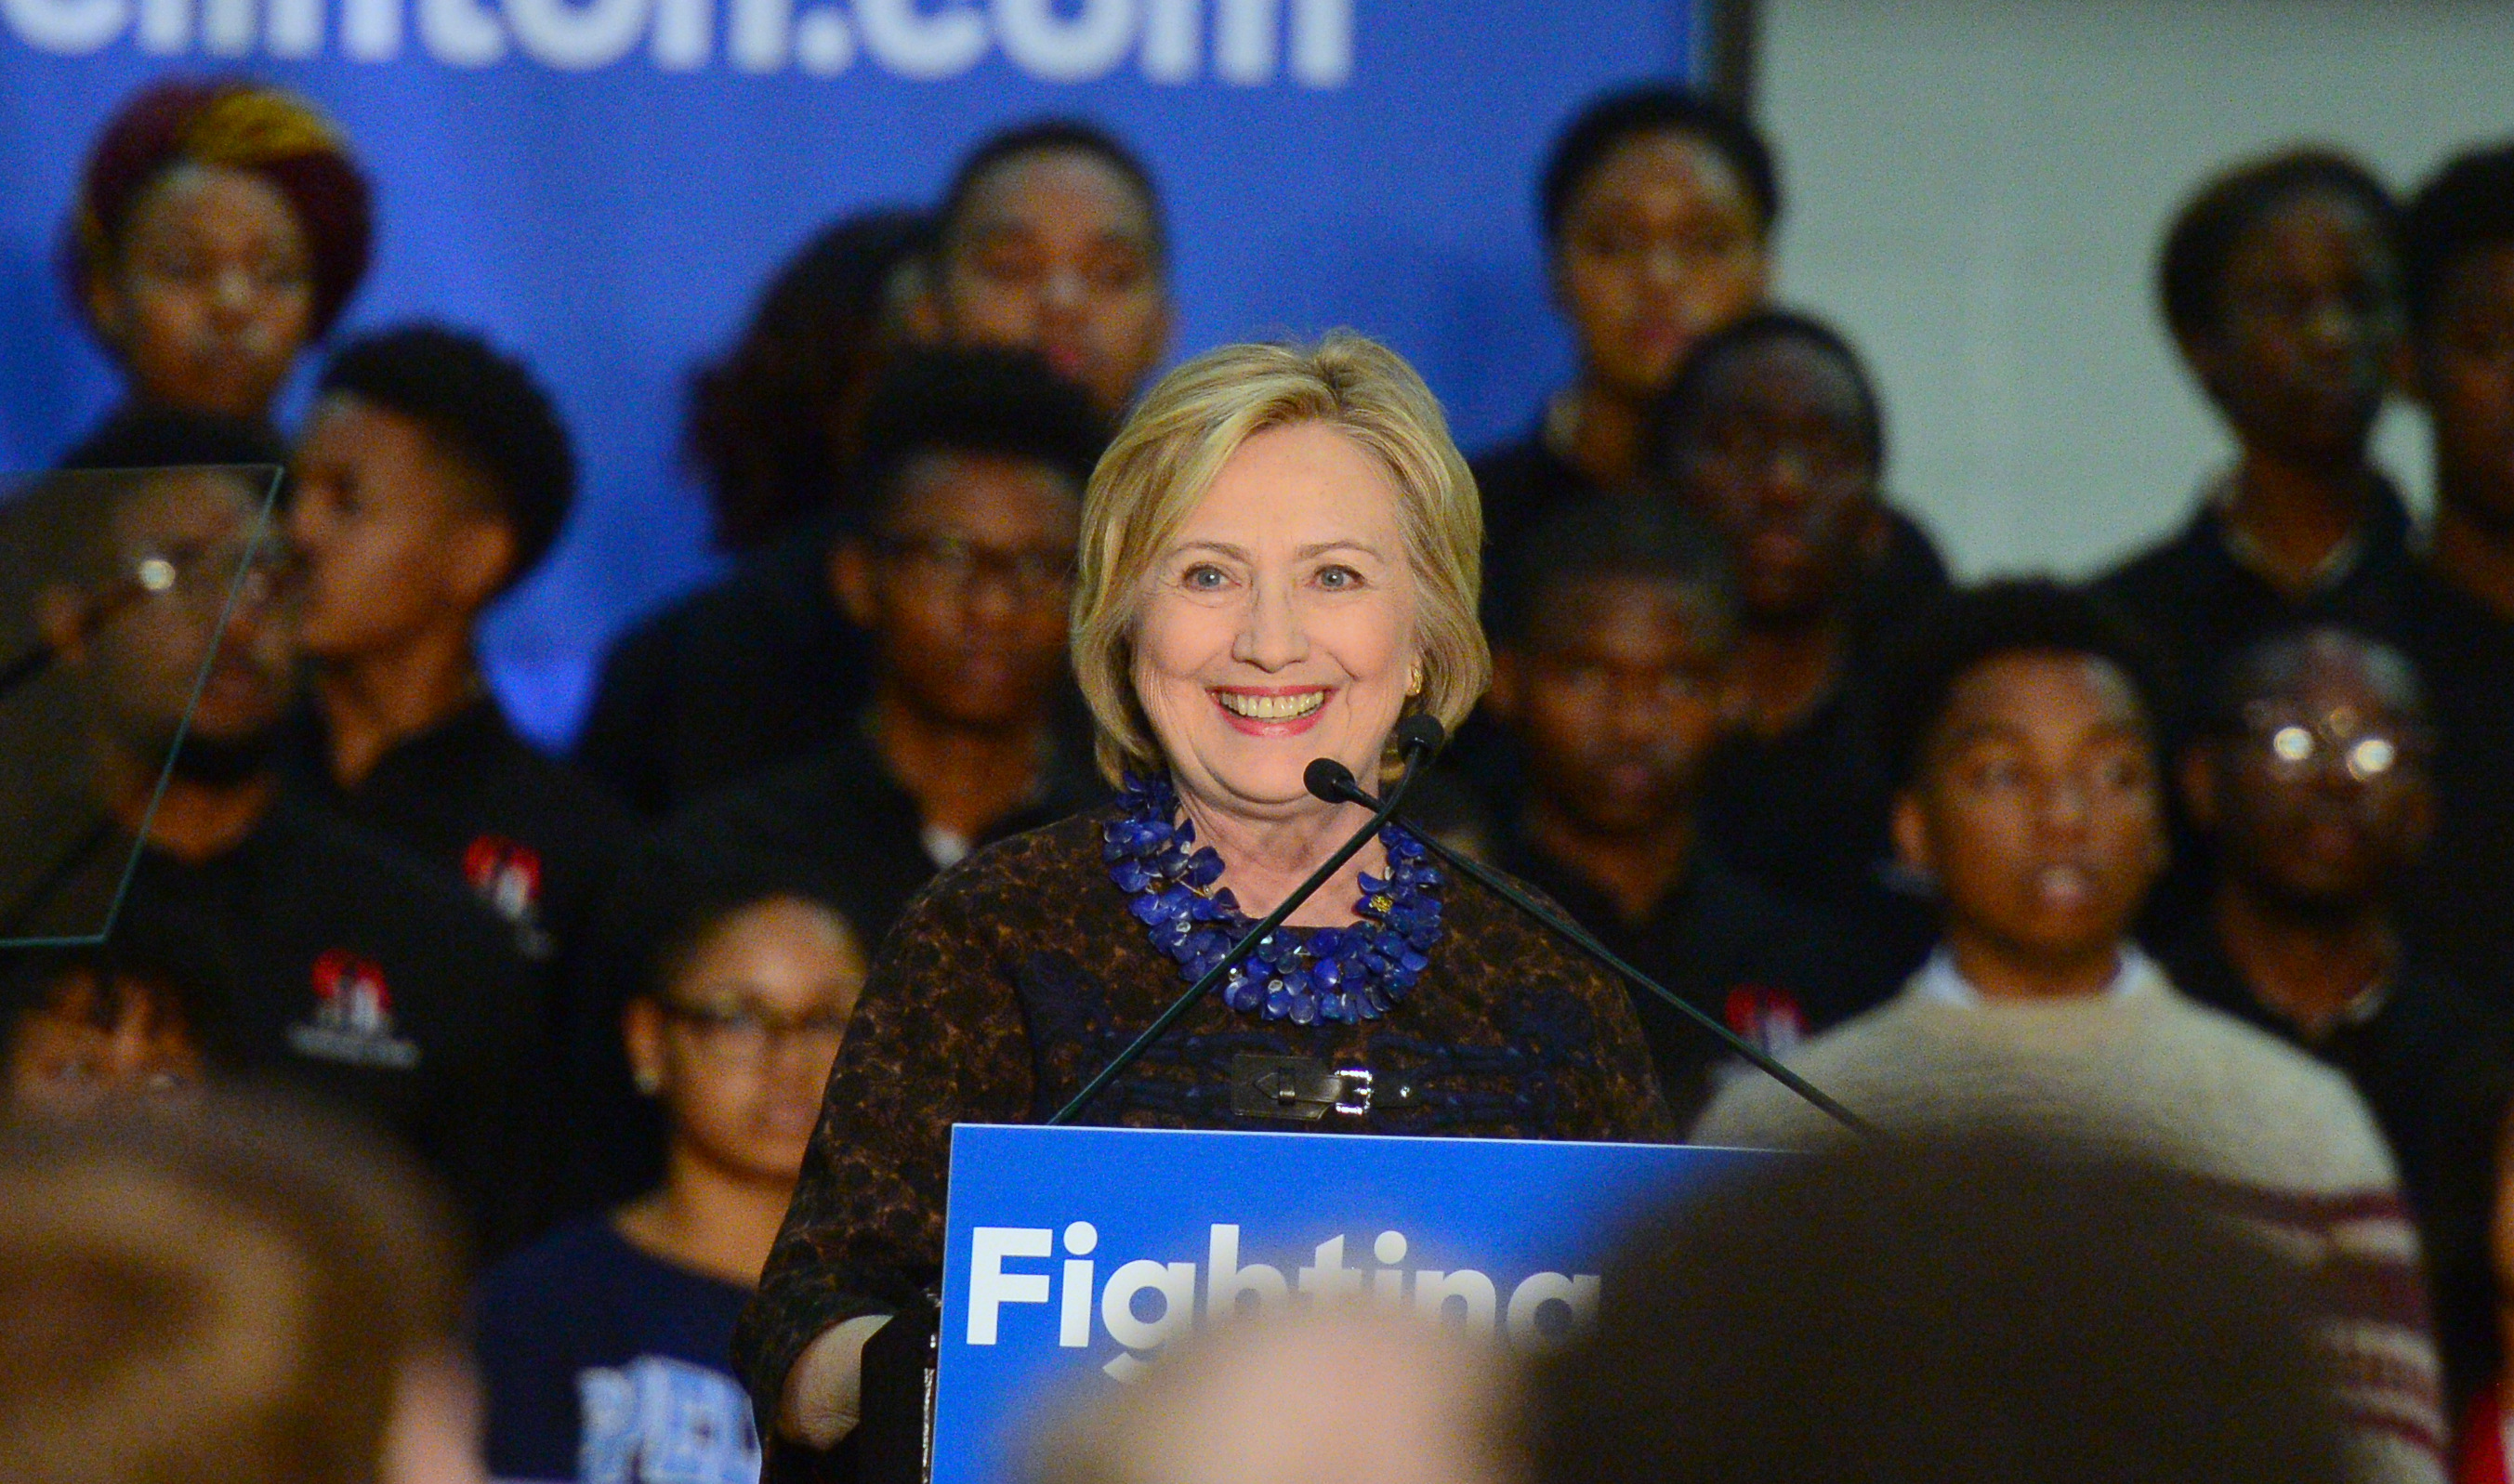 Hillary Clinton Speaks to Supporters during the "African Americans for Hillary Grassroots Organizing Meeting with Hillary Clinton" in Atlanta, GA, on Oct. 30, 2015. (Prince Williams—Getty Images)